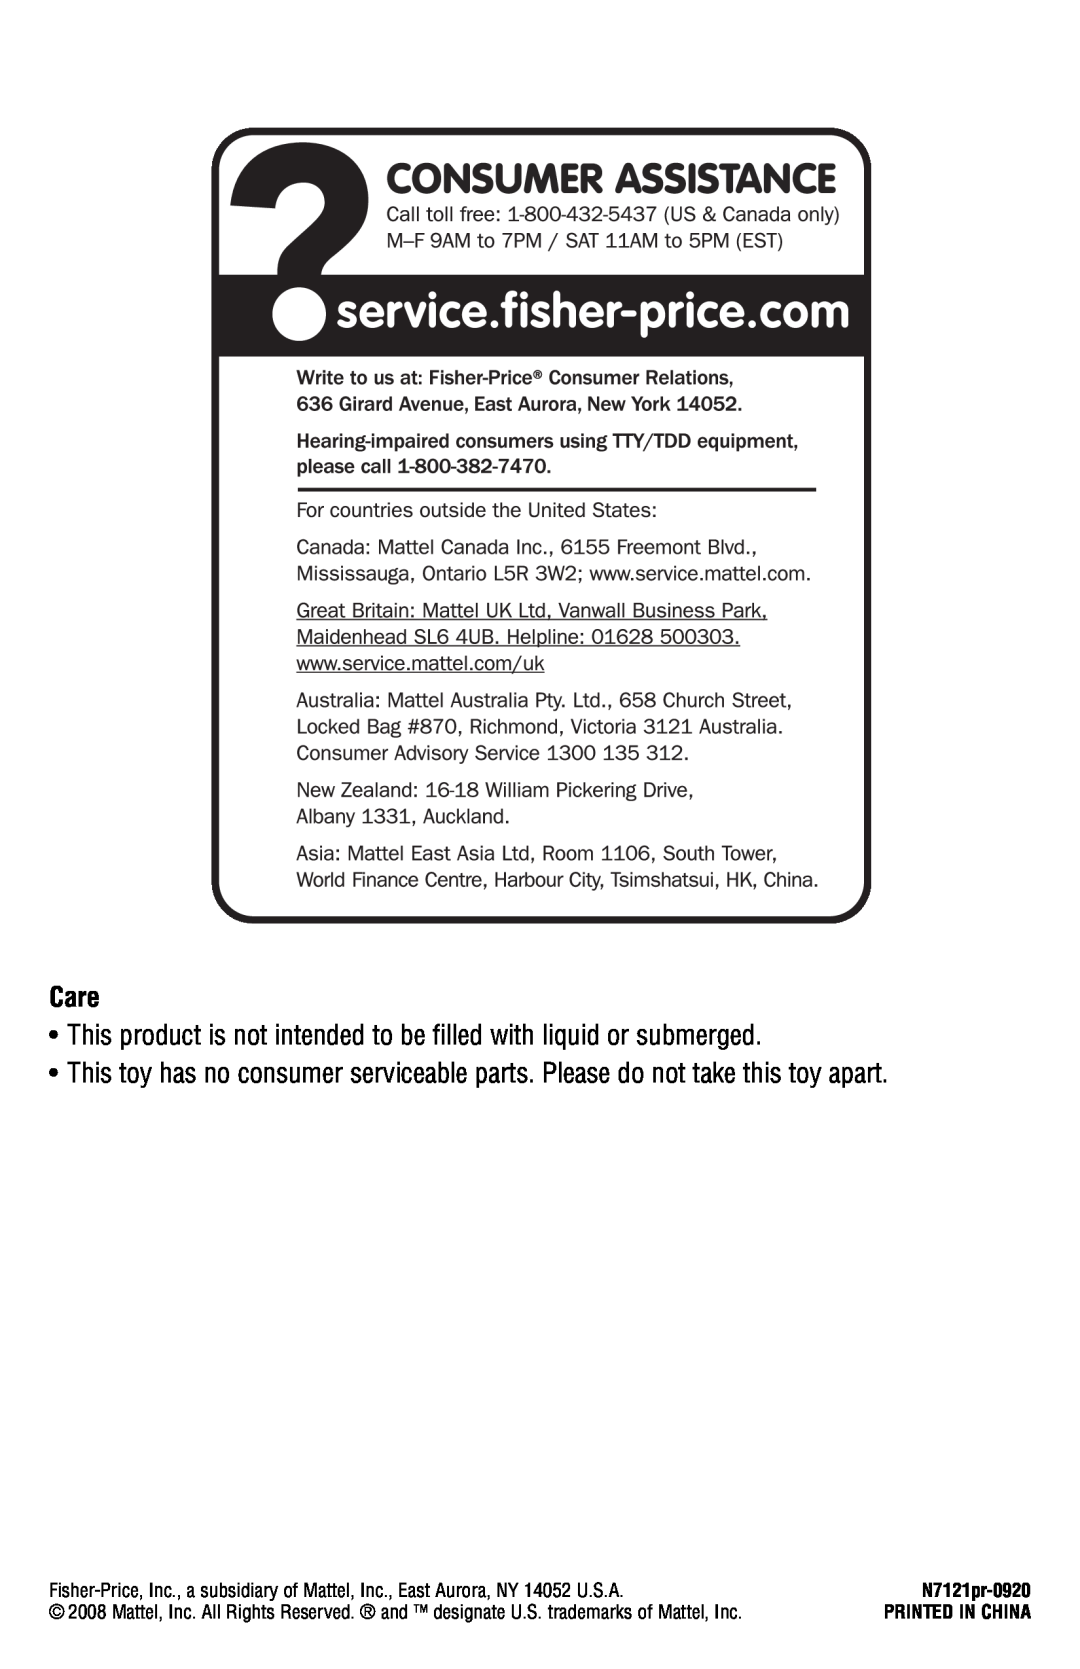 Fisher-Price instruction sheet Care, This product is not intended to be filled with liquid or submerged, N7121pr-0920 